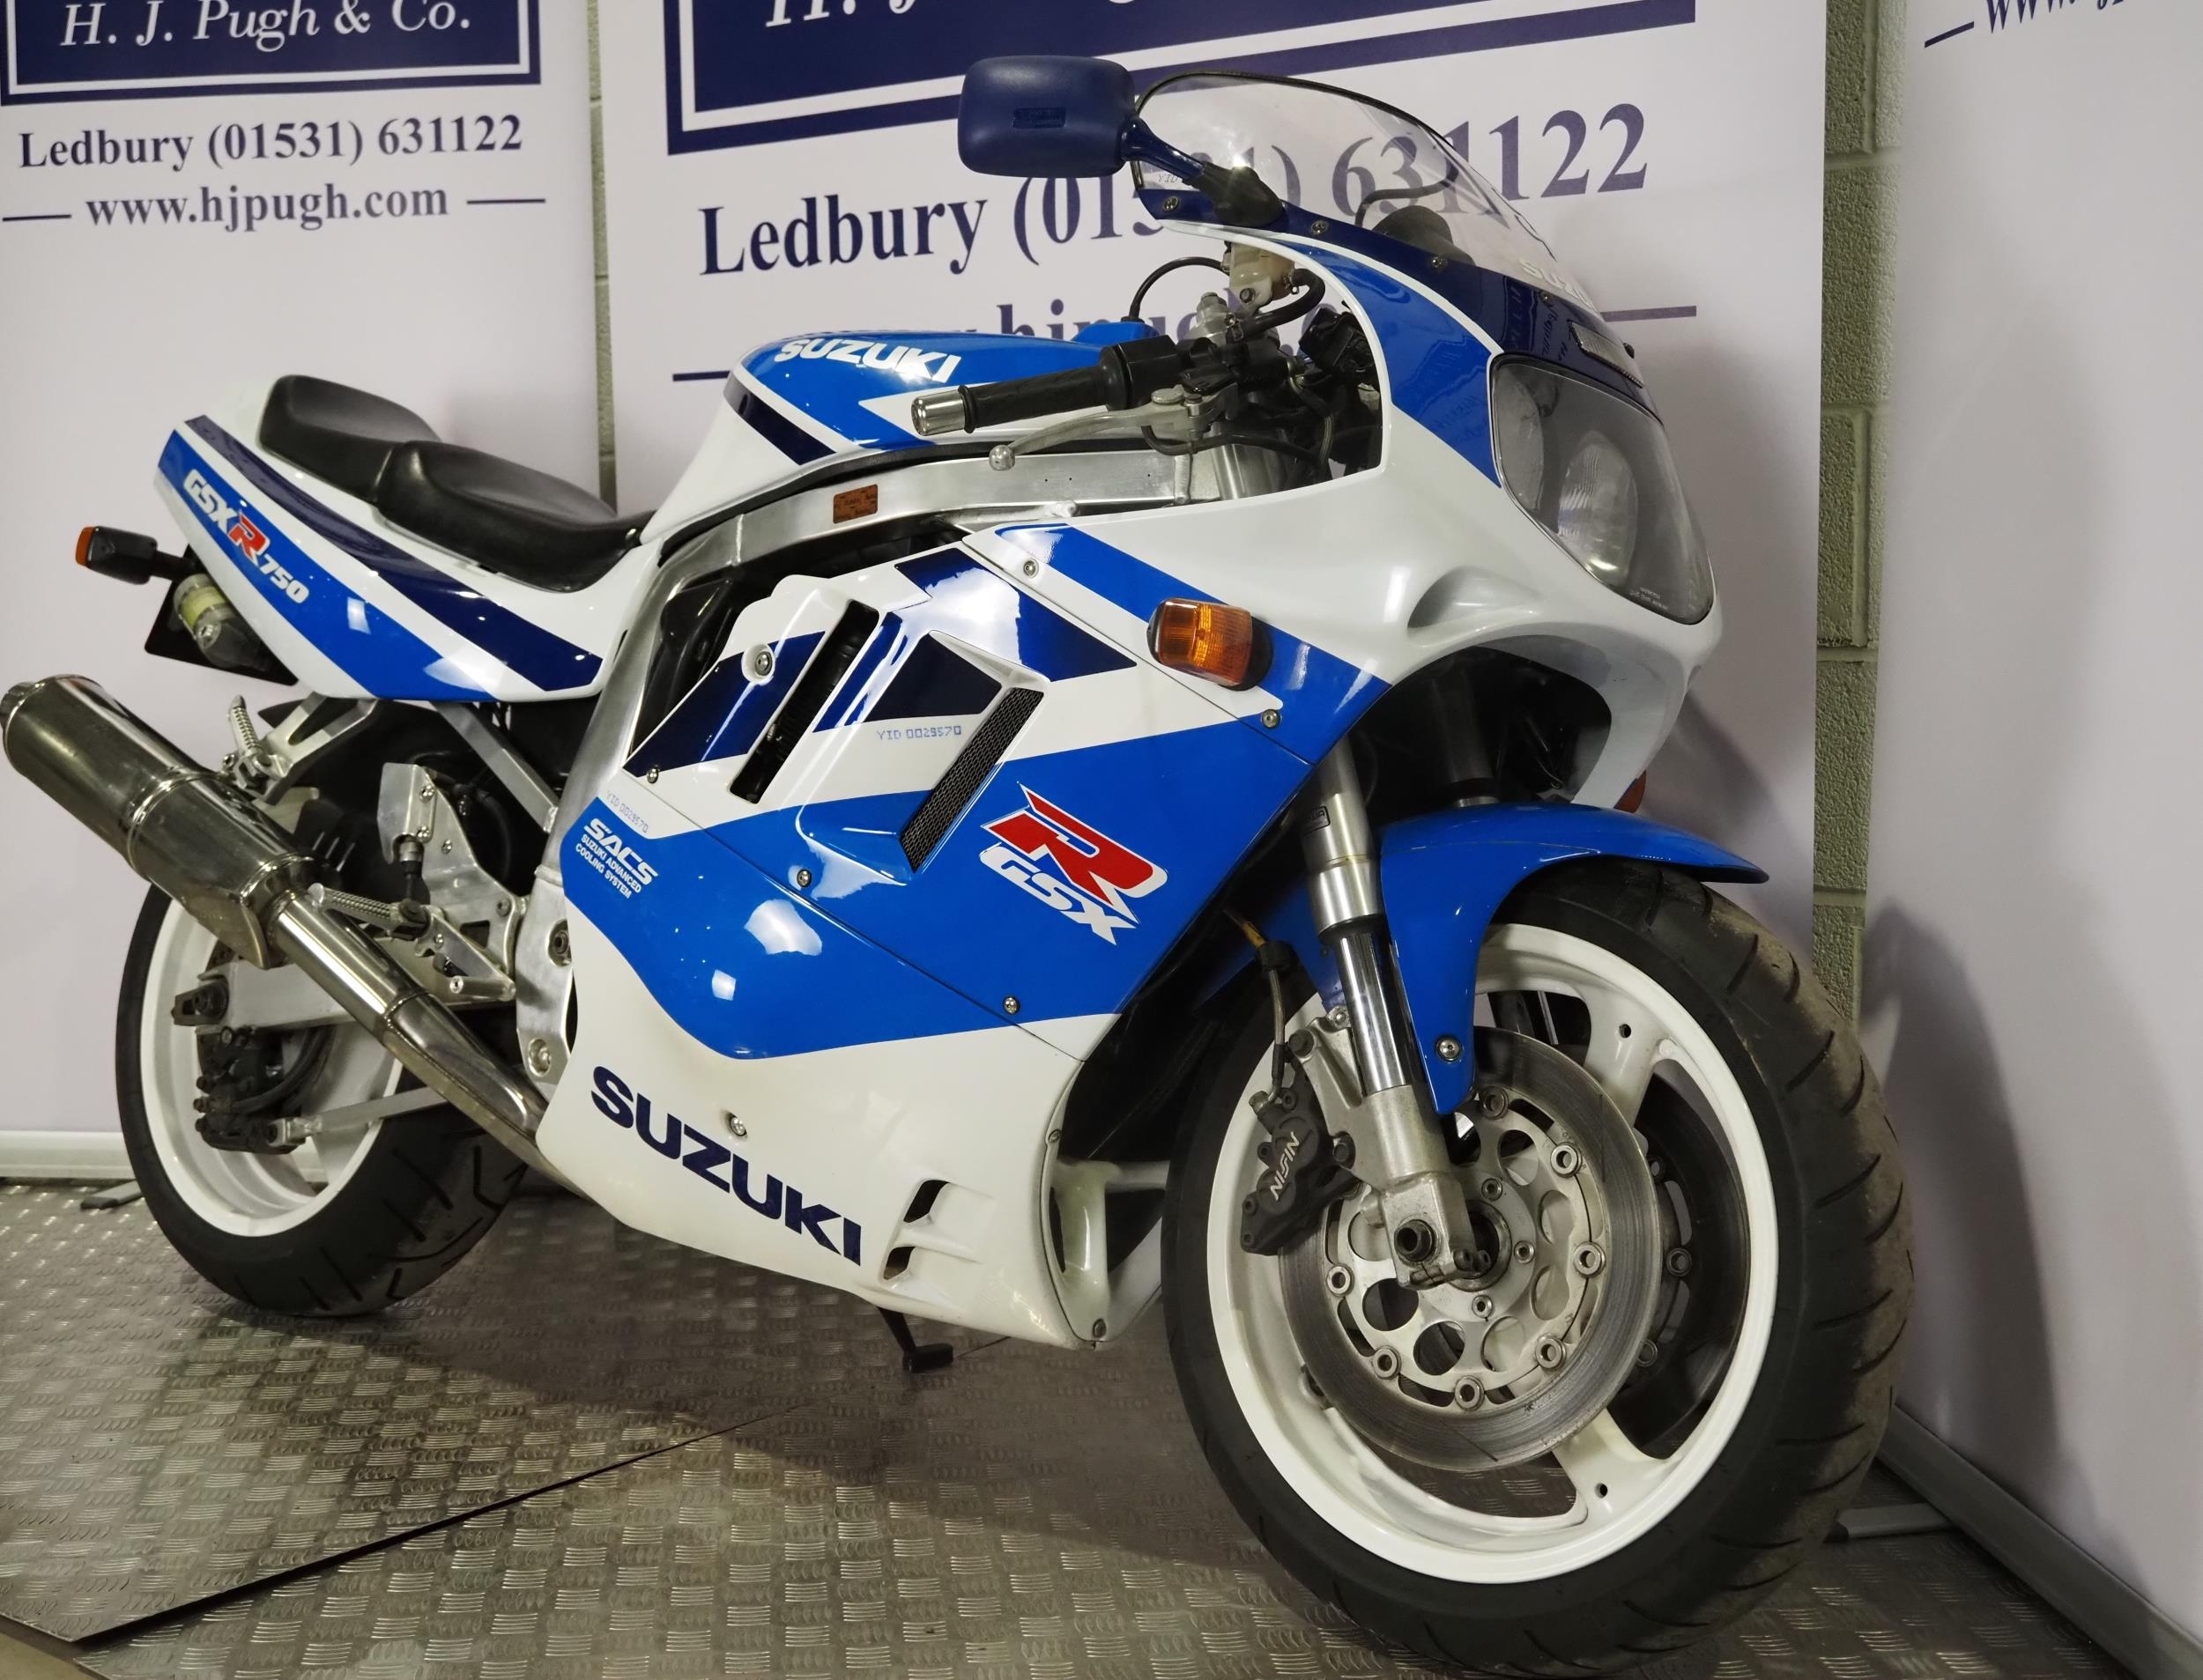 Suzuki GSXR750 motorcycle. 1991. 749cc Runs and rides but has been on display for several years so - Image 3 of 9